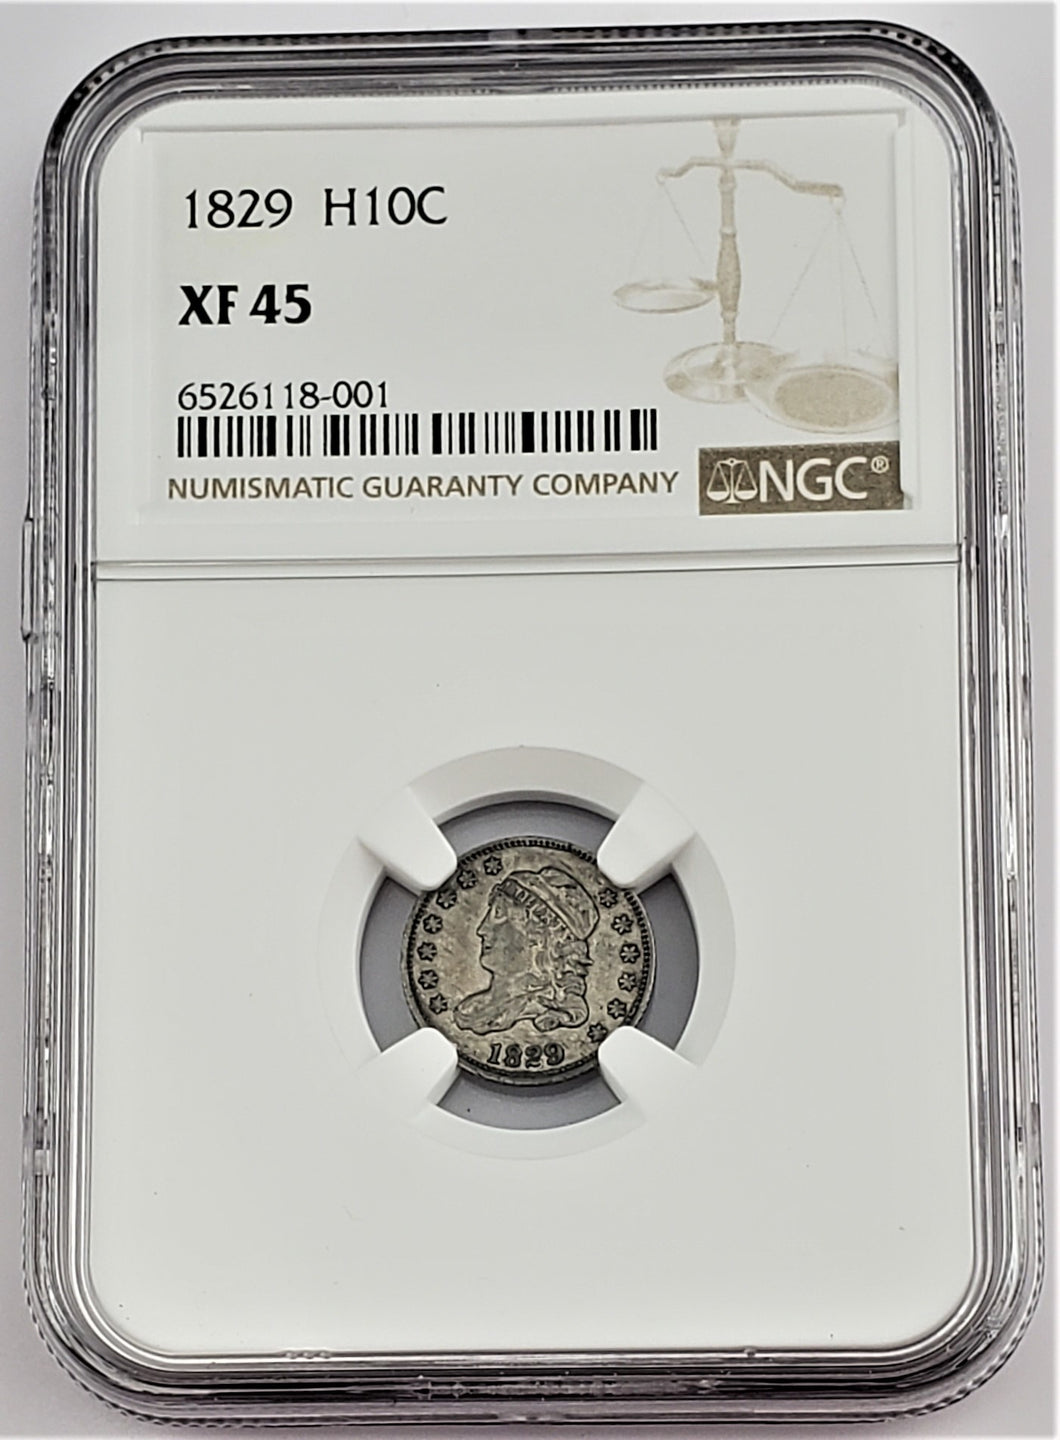 1829 P Capped Bust Half Dime 5c NGC XF 45 Old U.S Coin